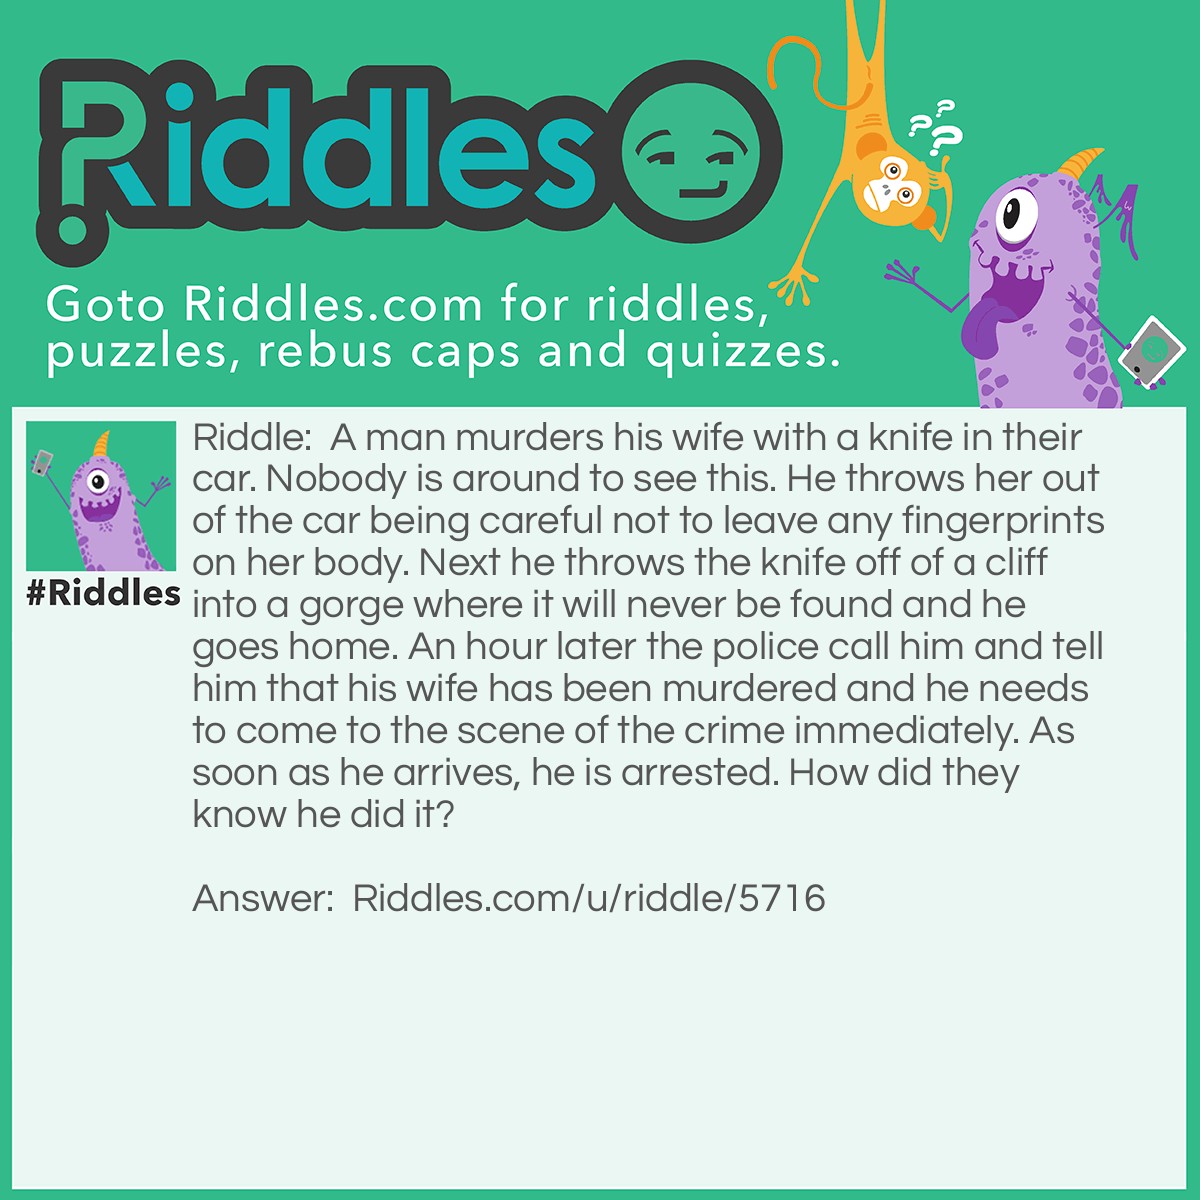 Riddle: A man murders his wife with a knife in their car. Nobody is around to see this. He throws her out of the car being careful not to leave any fingerprints on her body. Next he throws the knife off of a cliff into a gorge where it will never be found and he goes home. An hour later the police call him and tell him that his wife has been murdered and he needs to come to the scene of the crime immediately. As soon as he arrives, he is arrested. How did they know he did it? Answer: He never asked the cop where the scene of the crime was, so they knew that he had murdered his wife.